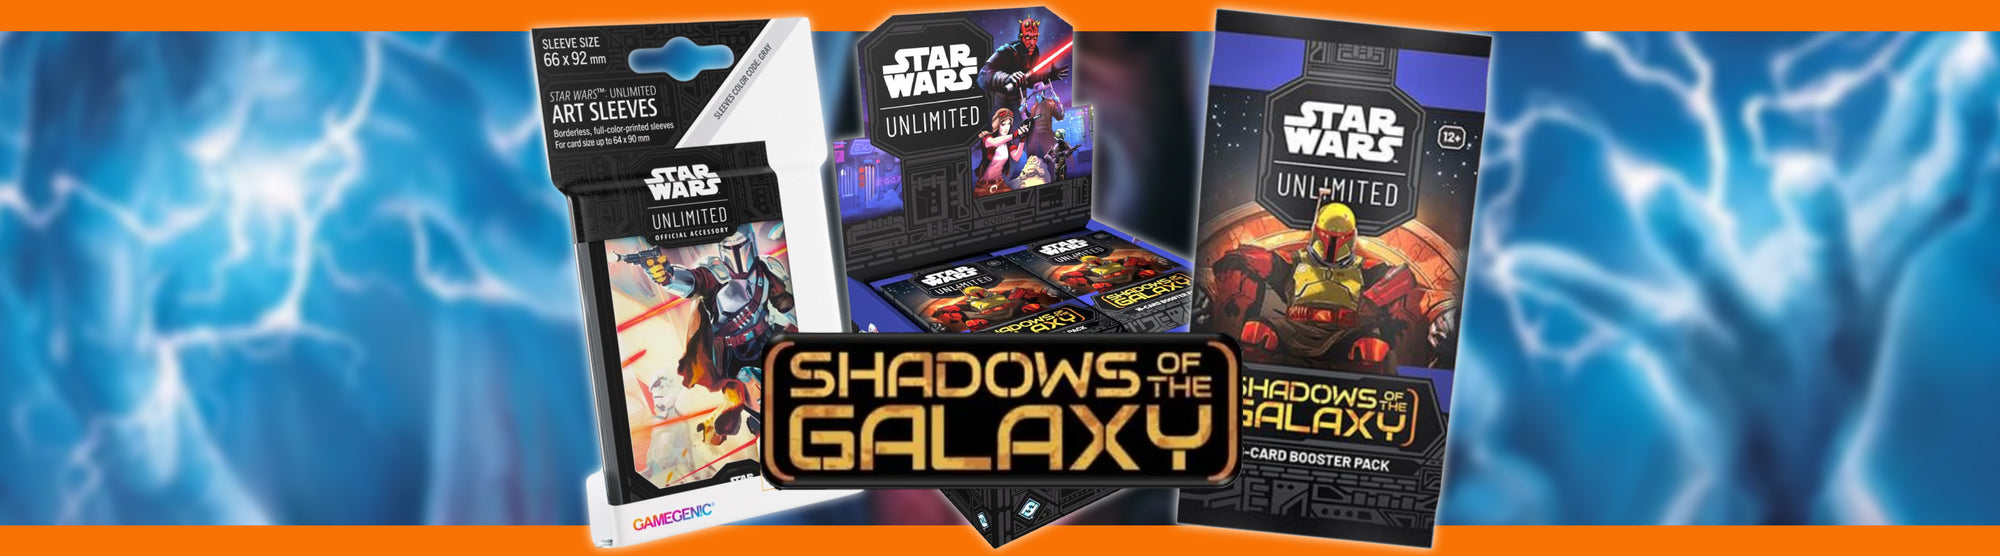 star wars unlimited shadows of the galaxy